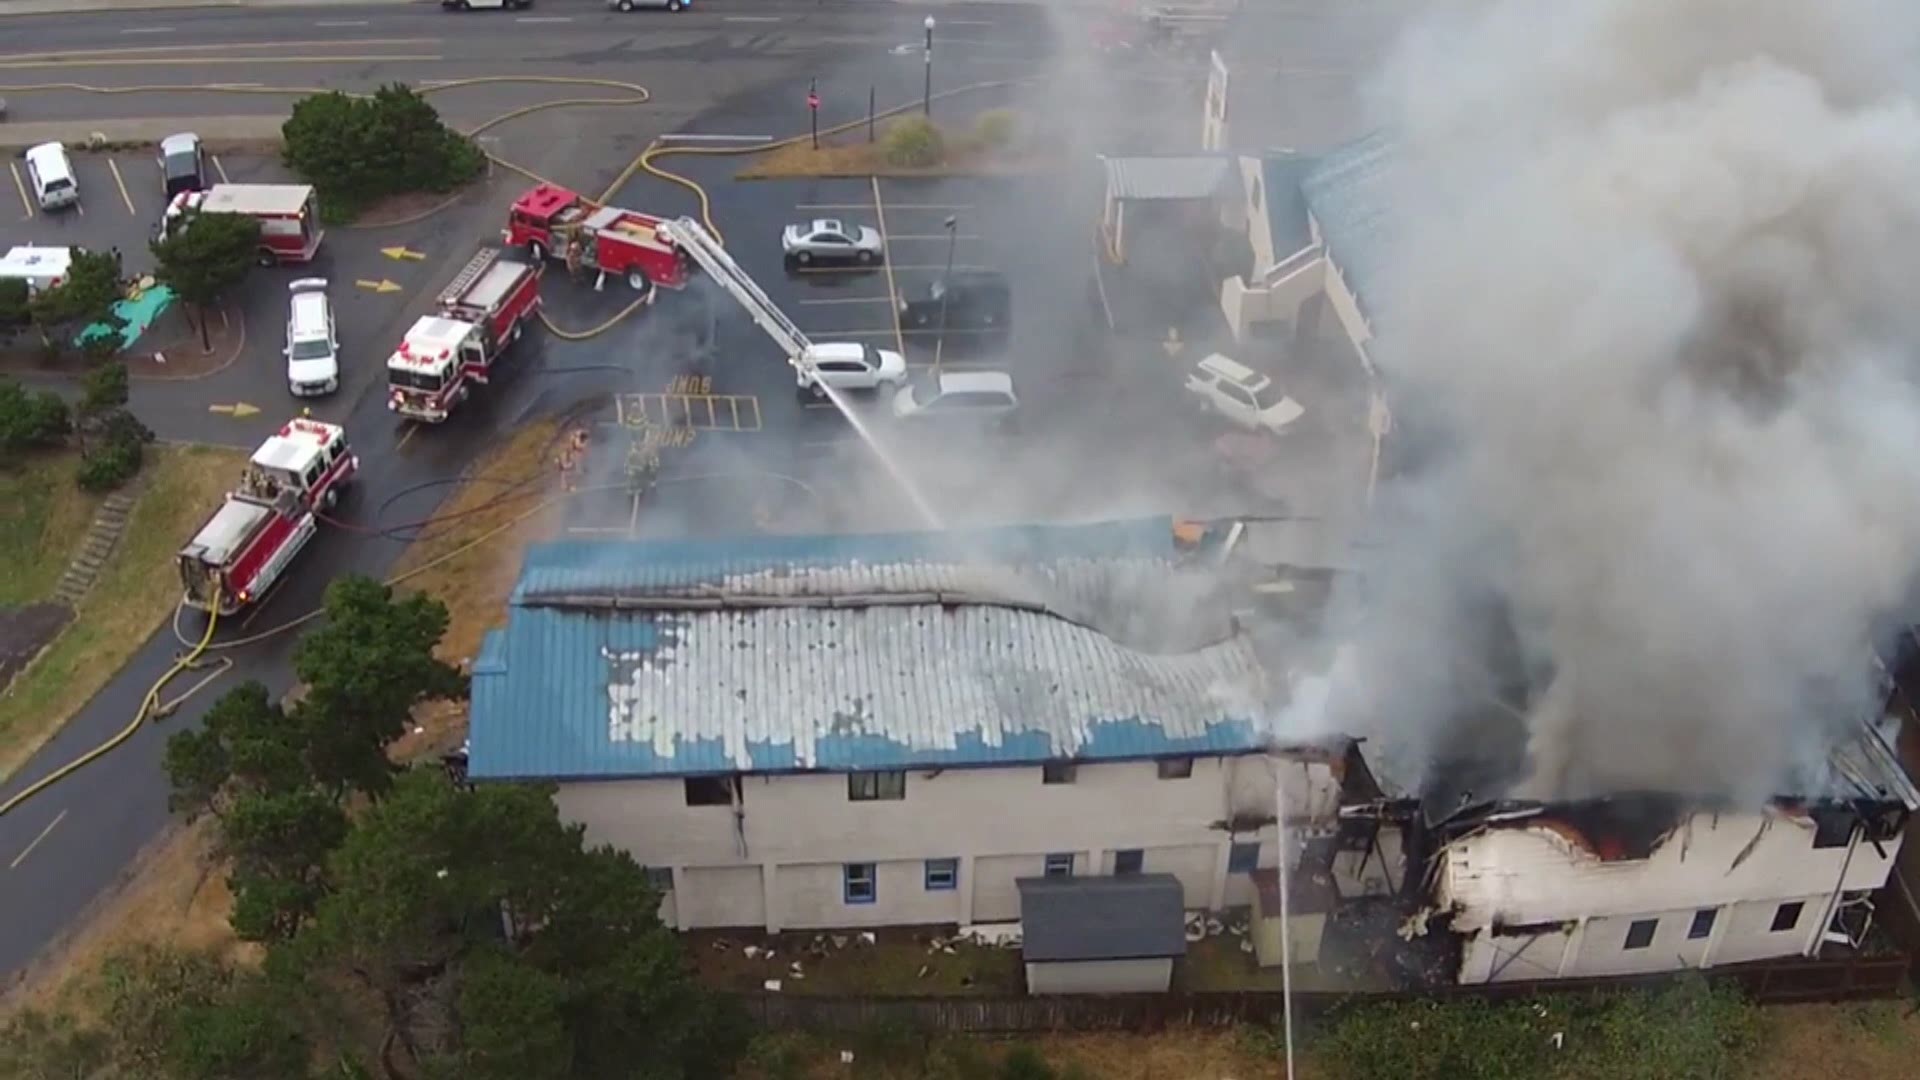 Video of the fire in Newport.